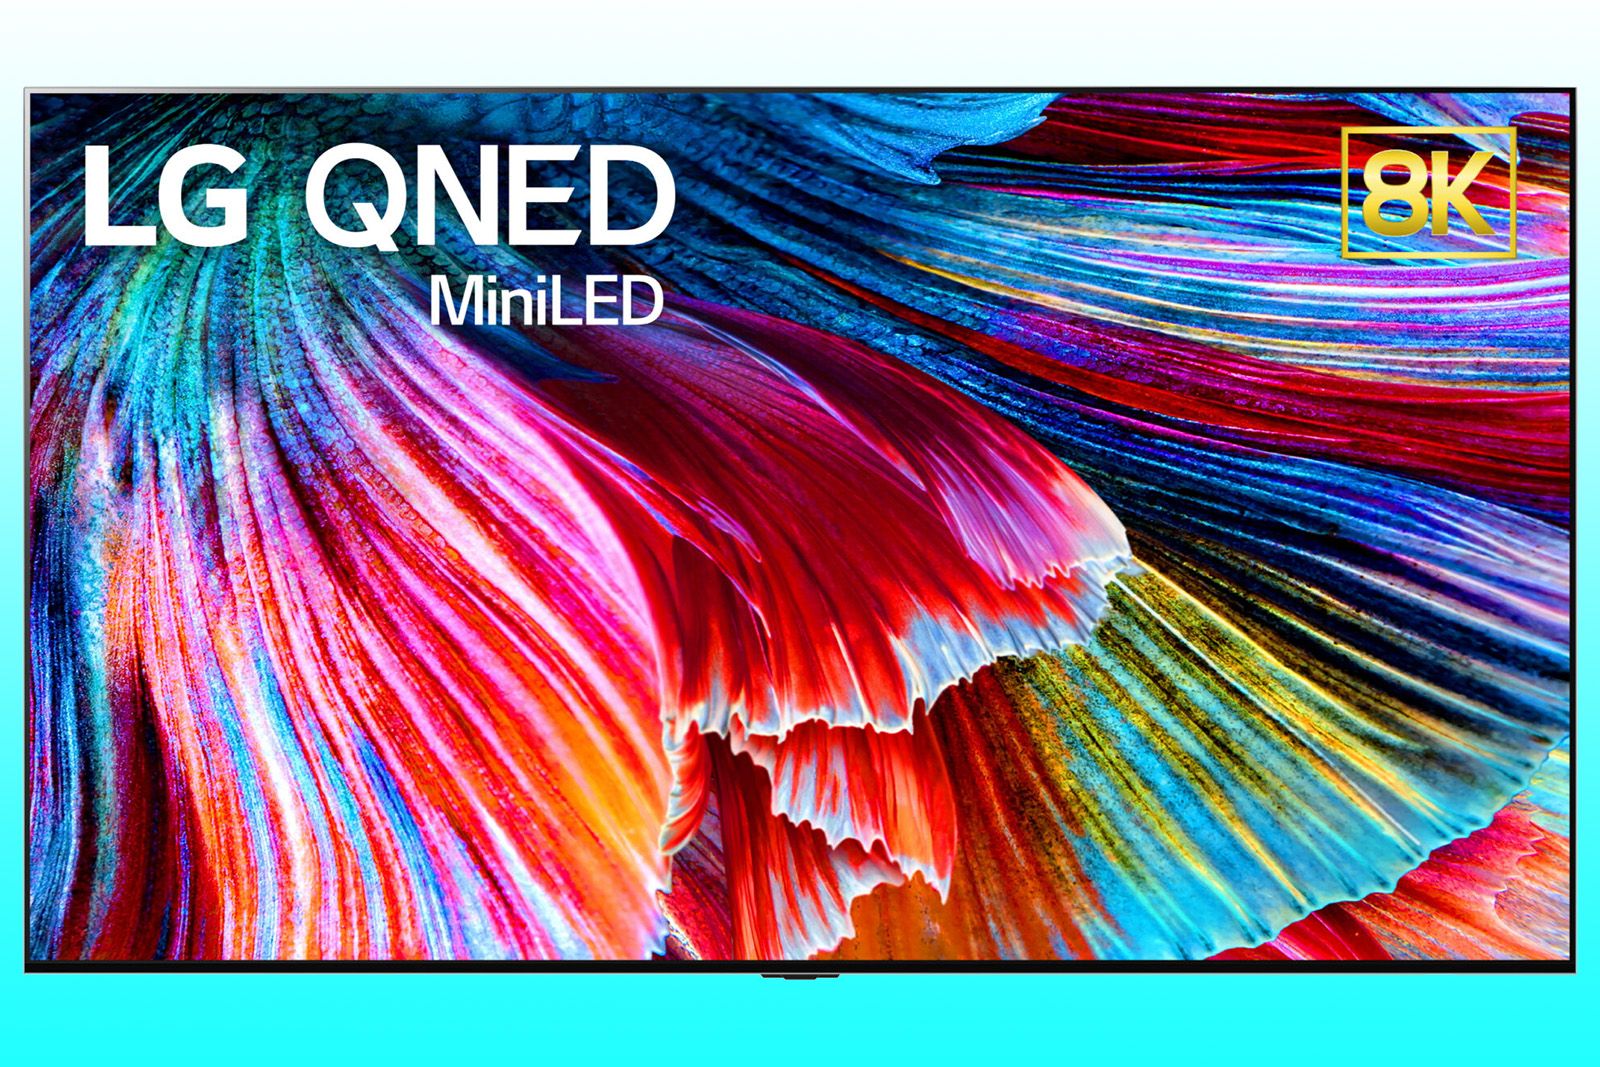 LG's CES 2021 lineup to include first QNED Mini LED TV range, with 8K and 4K models photo 1